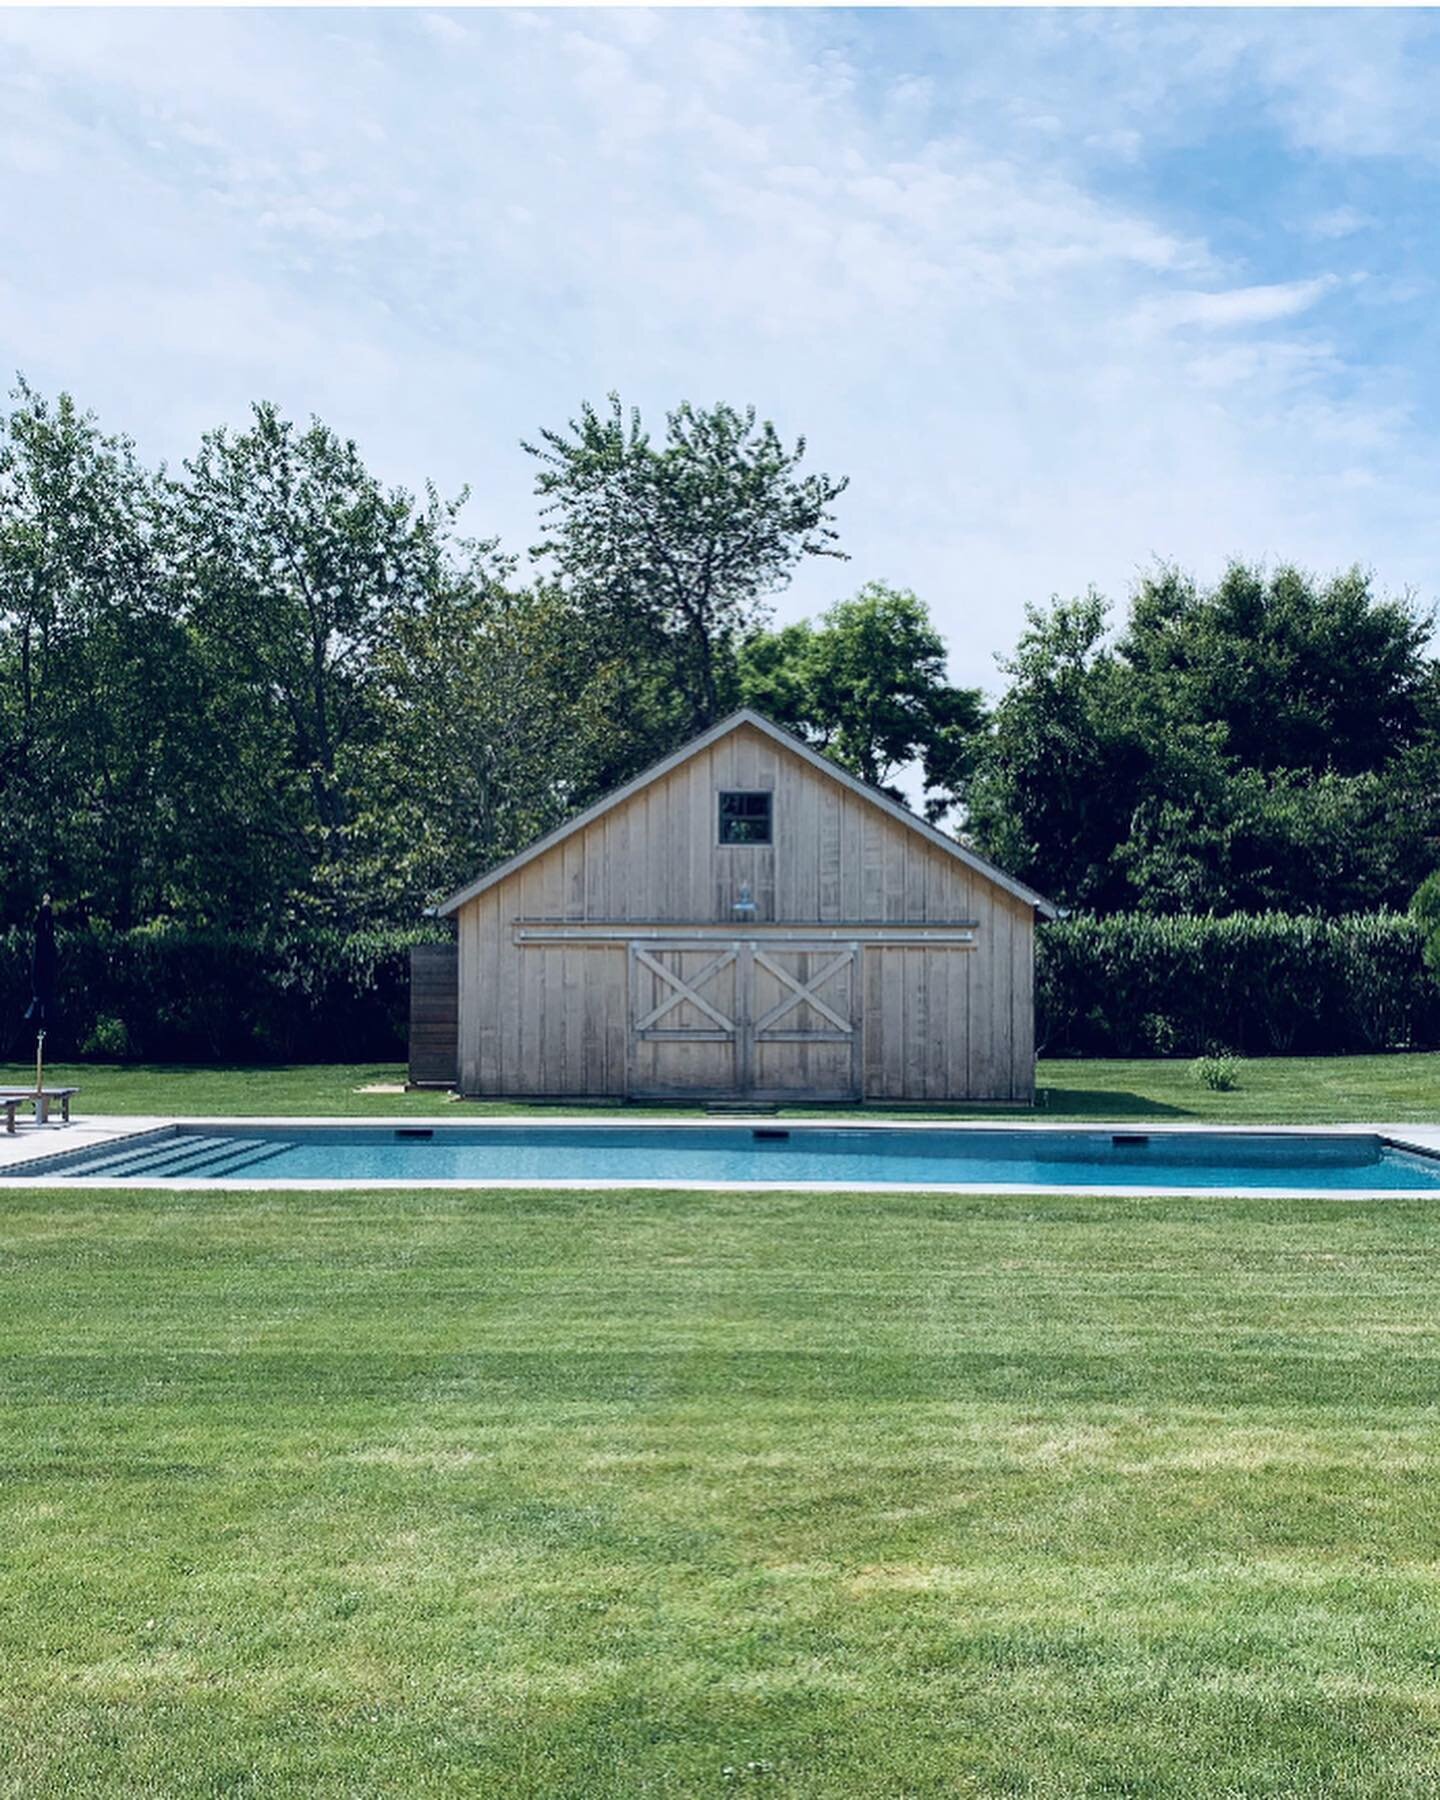 A little pool house in order to escape the august house guests in Orient, NY
.
.
.
.
Architecture by @Samuelssteelman 
Interiors by @worktablenyc 
#northforkliving #inteiors #orientny #modernfarmhouse